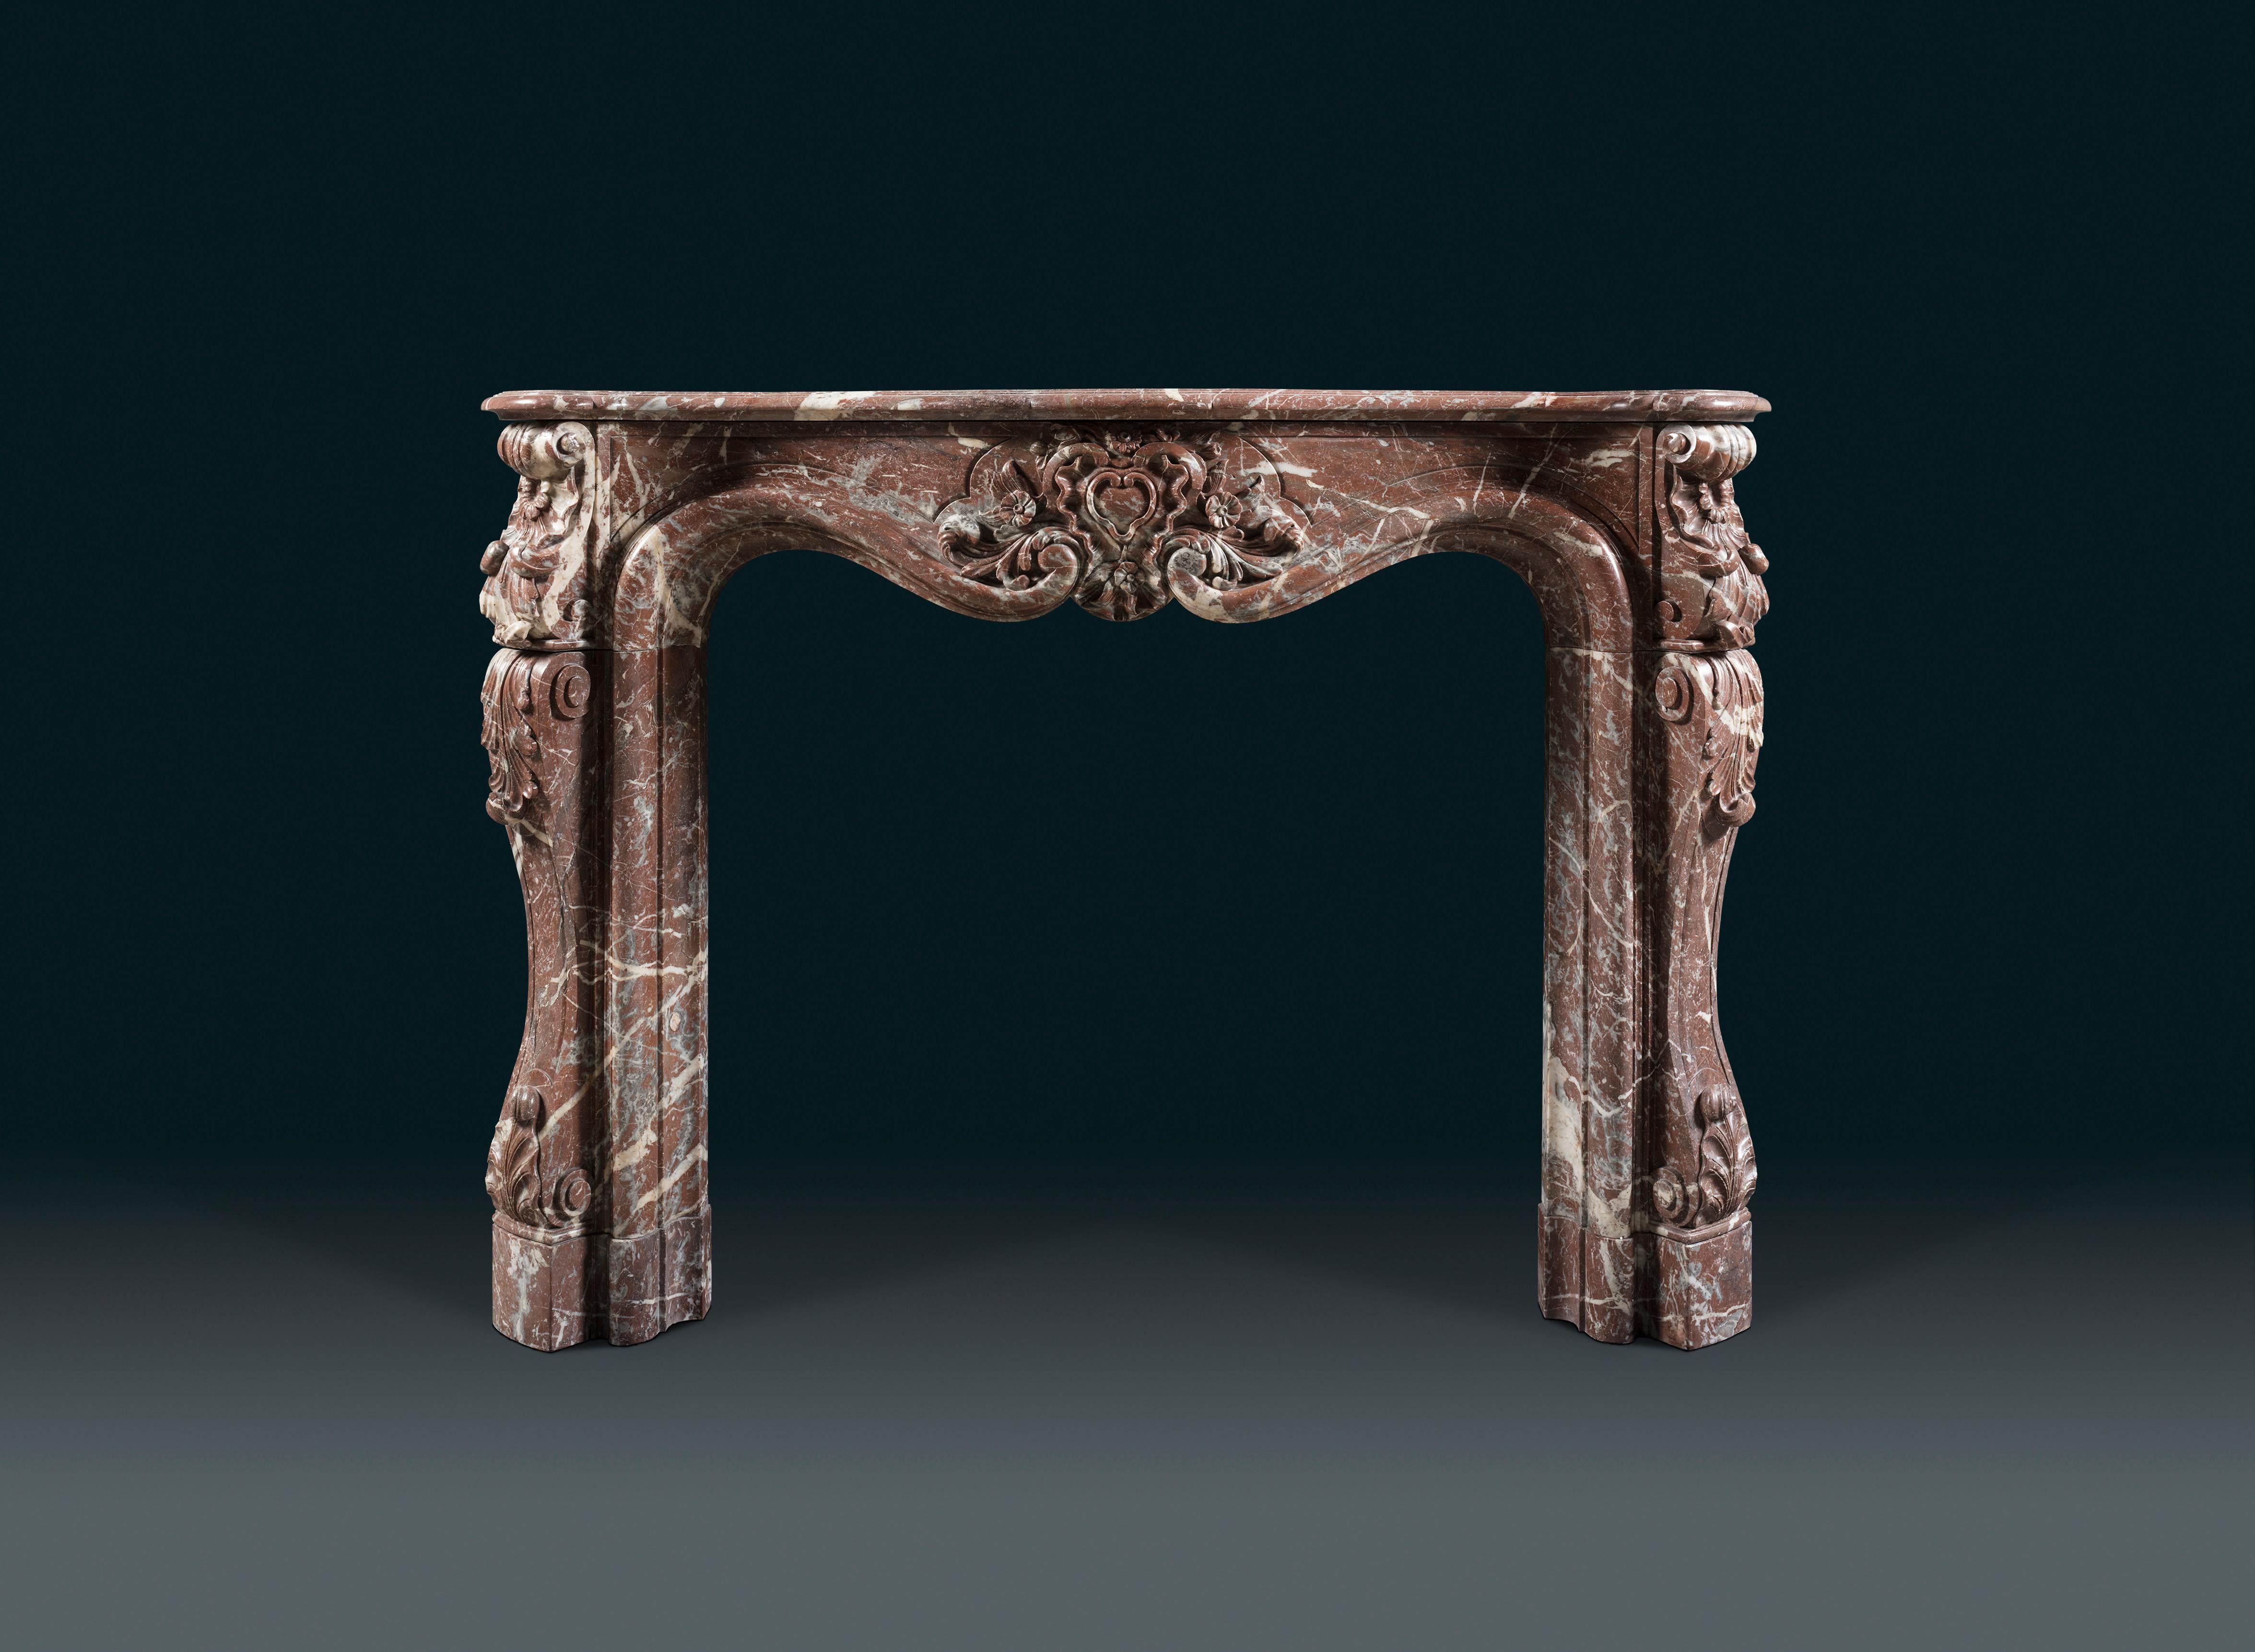 A Louis XV style Rococo chimneypiece in Rosso Antico marble with an elegant, moulded shelf. The fine asymmetric serpentine frieze presents a central cartouche in the shape of a stylised shell, flanked by foliage and panels. Shell corner blocks